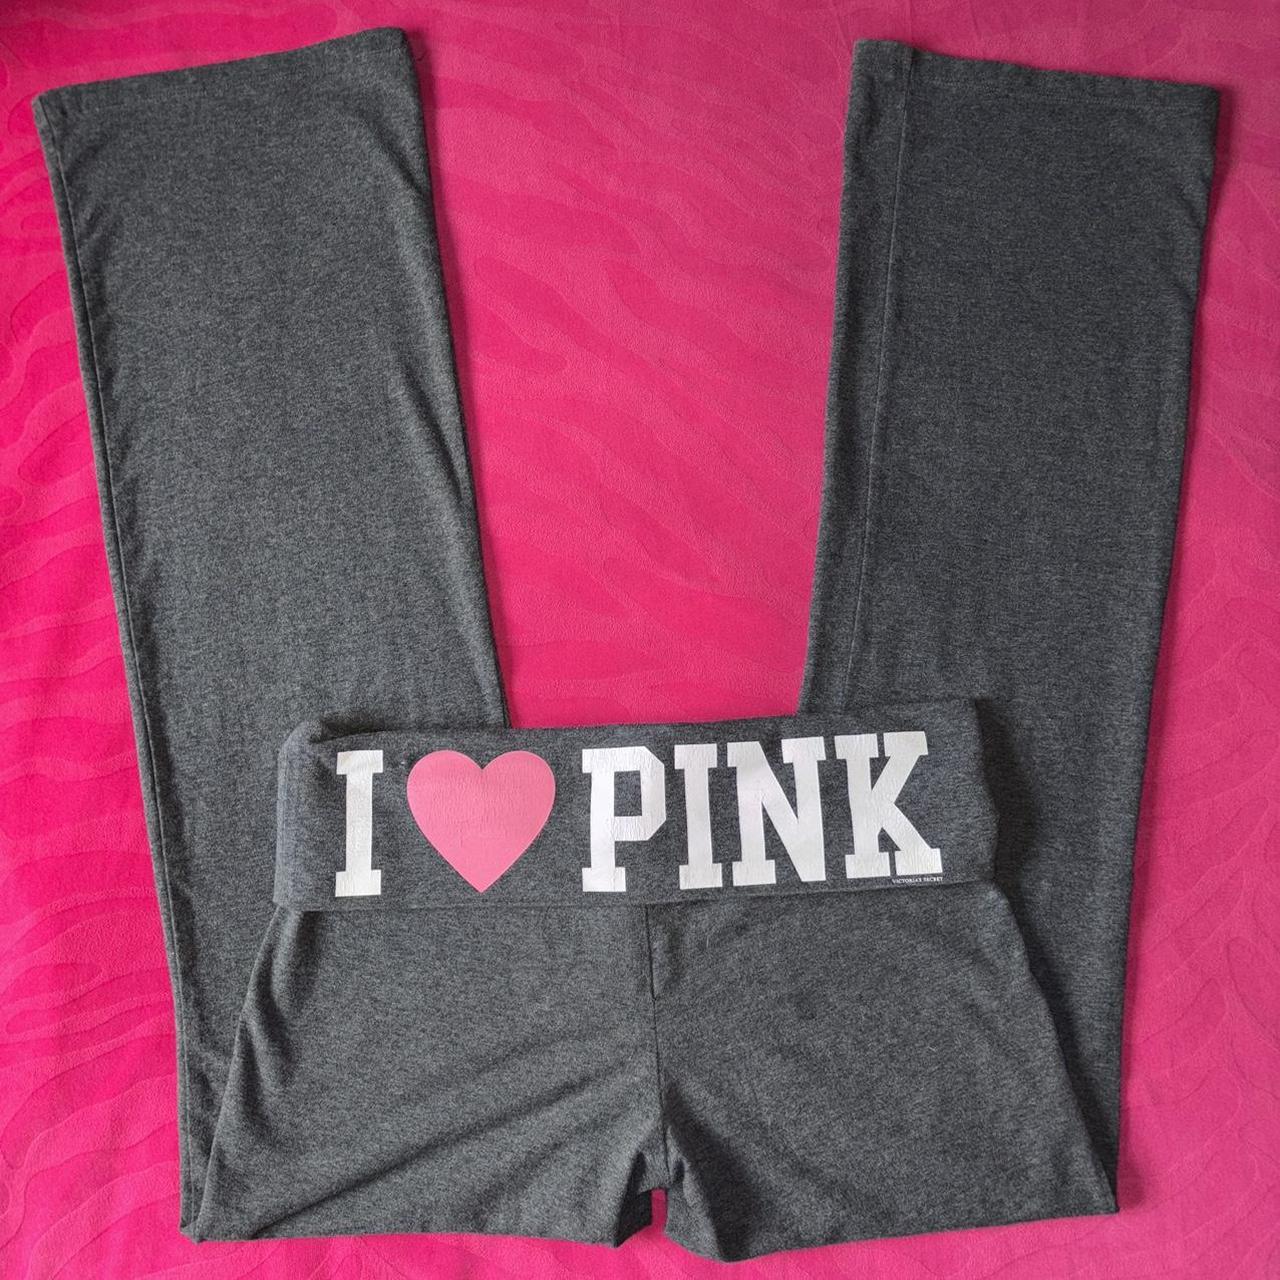 Victoria's Secret PINK fold over flare yoga pants - Depop  Victoria secret  pink yoga pants, Fold over yoga pants, Outfits with leggings